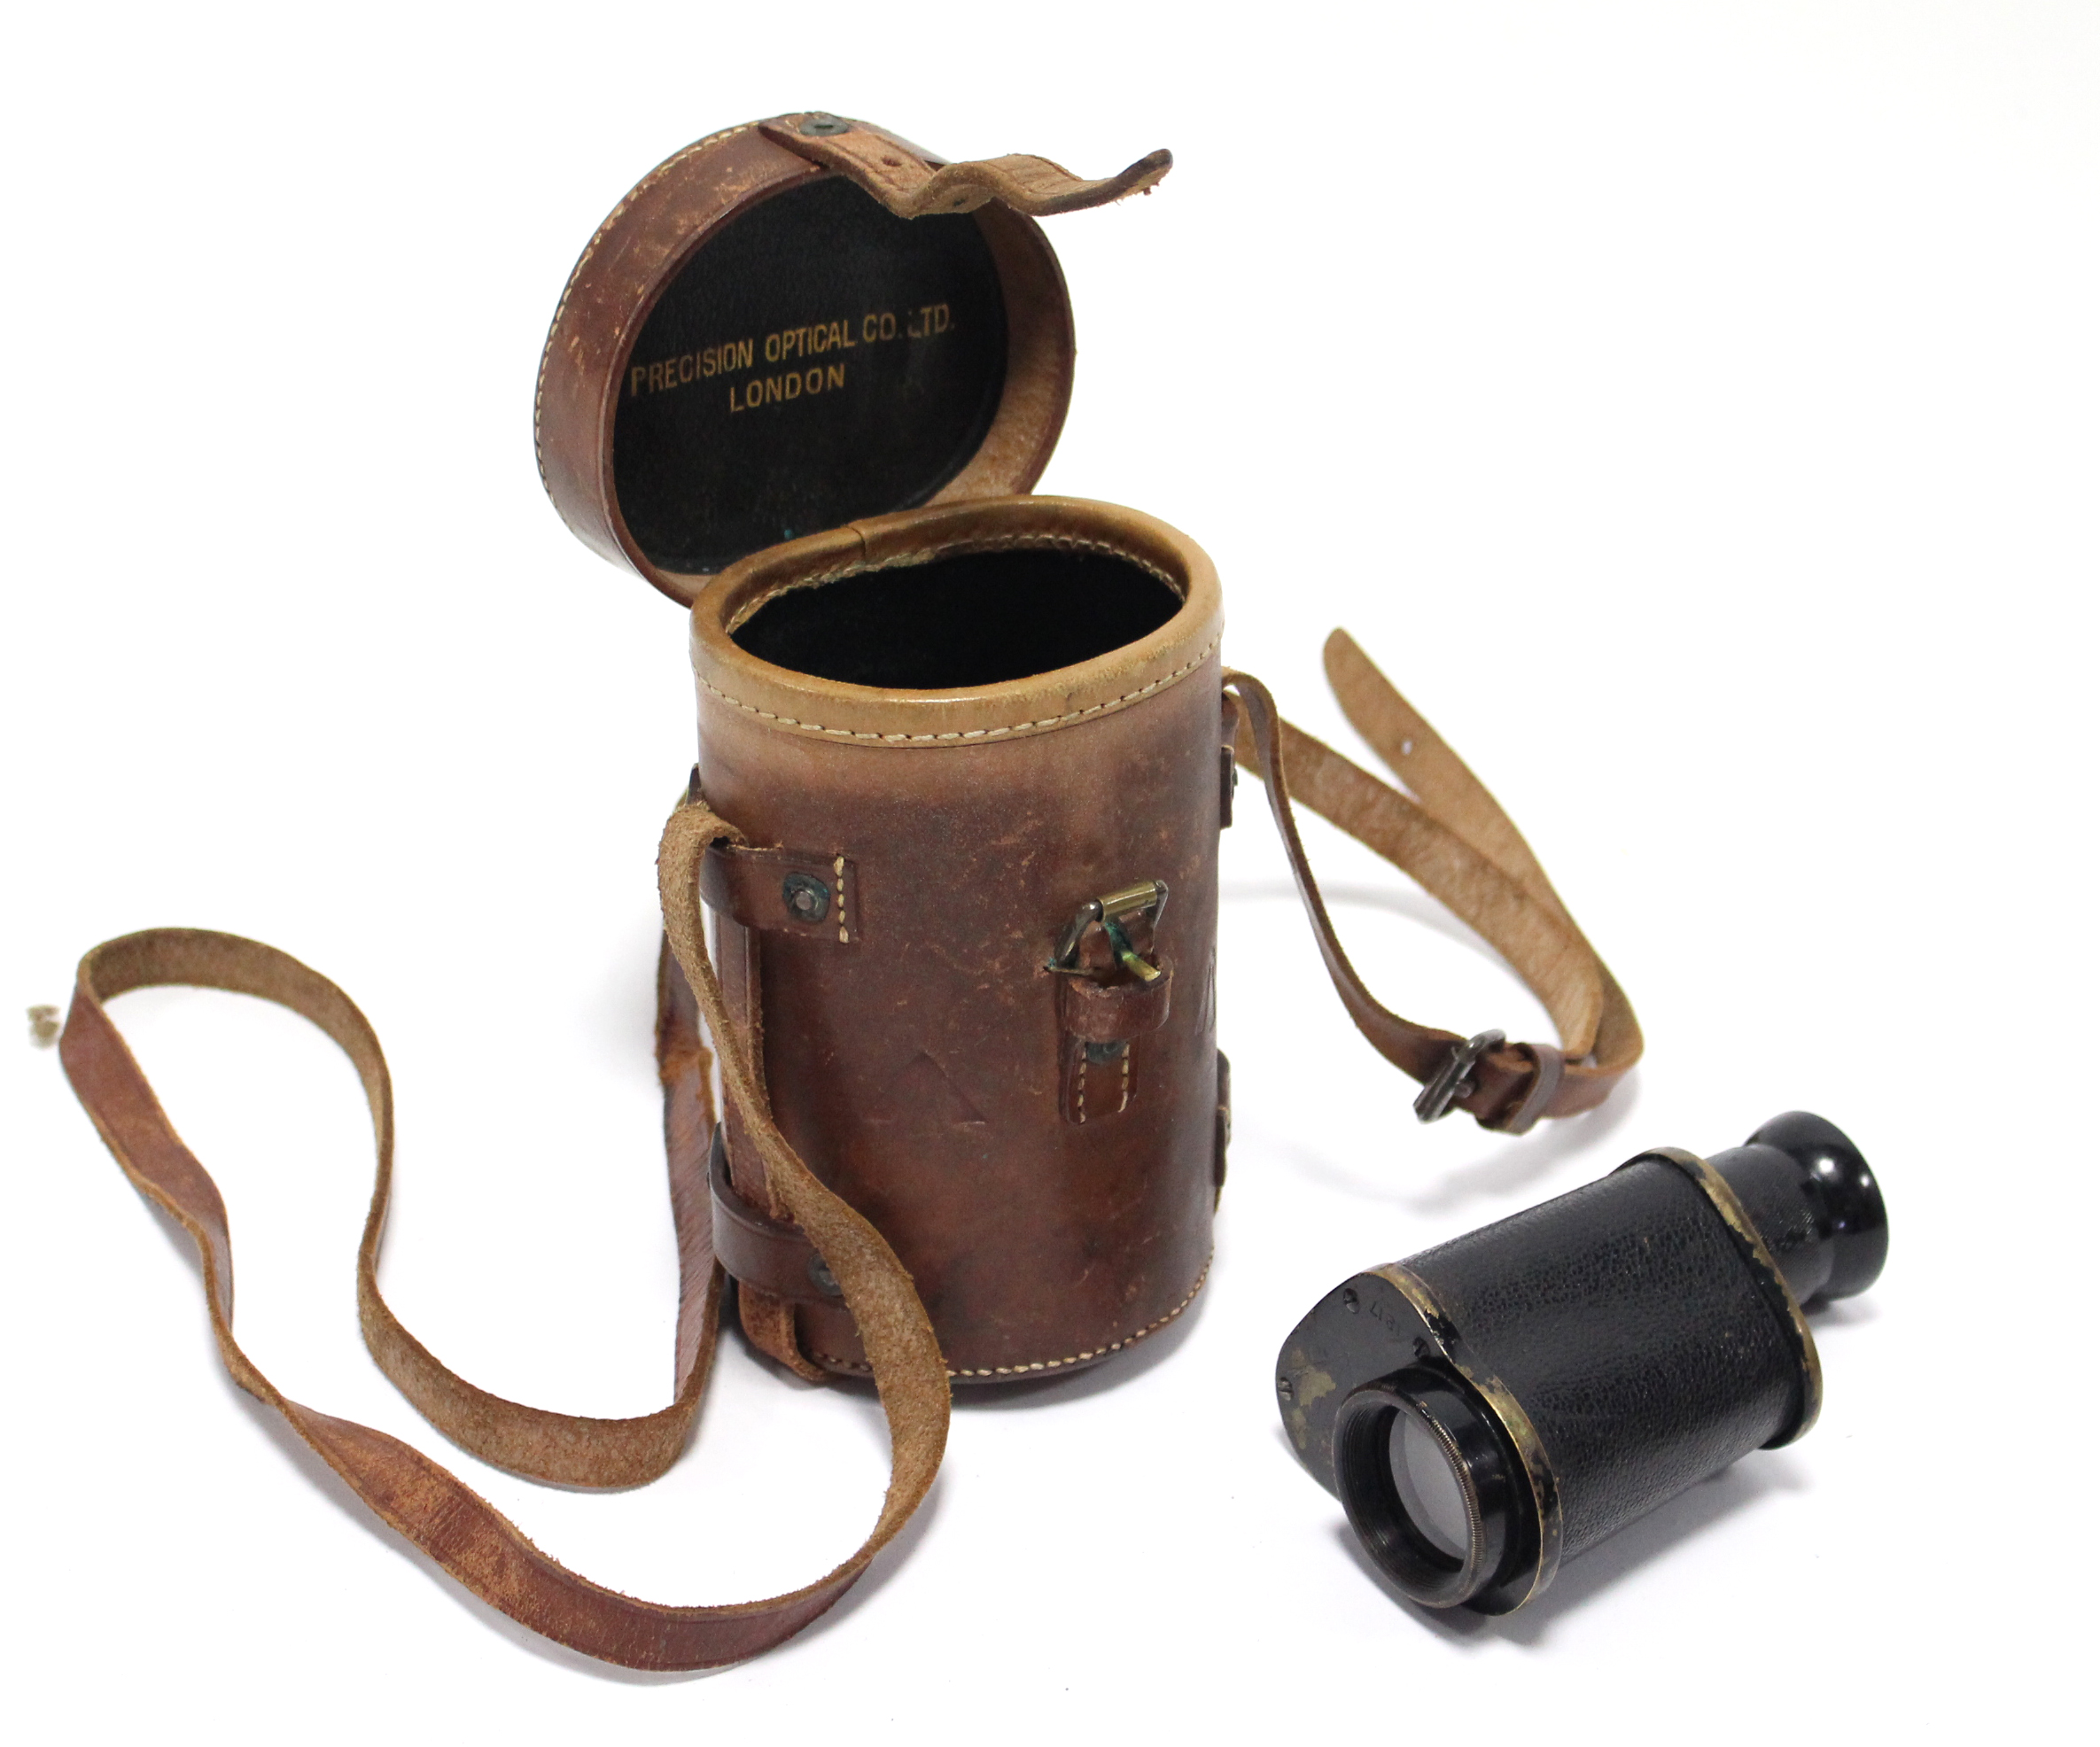 A WW1 British monocular by the Precision Optical Co. of London, with leather case.